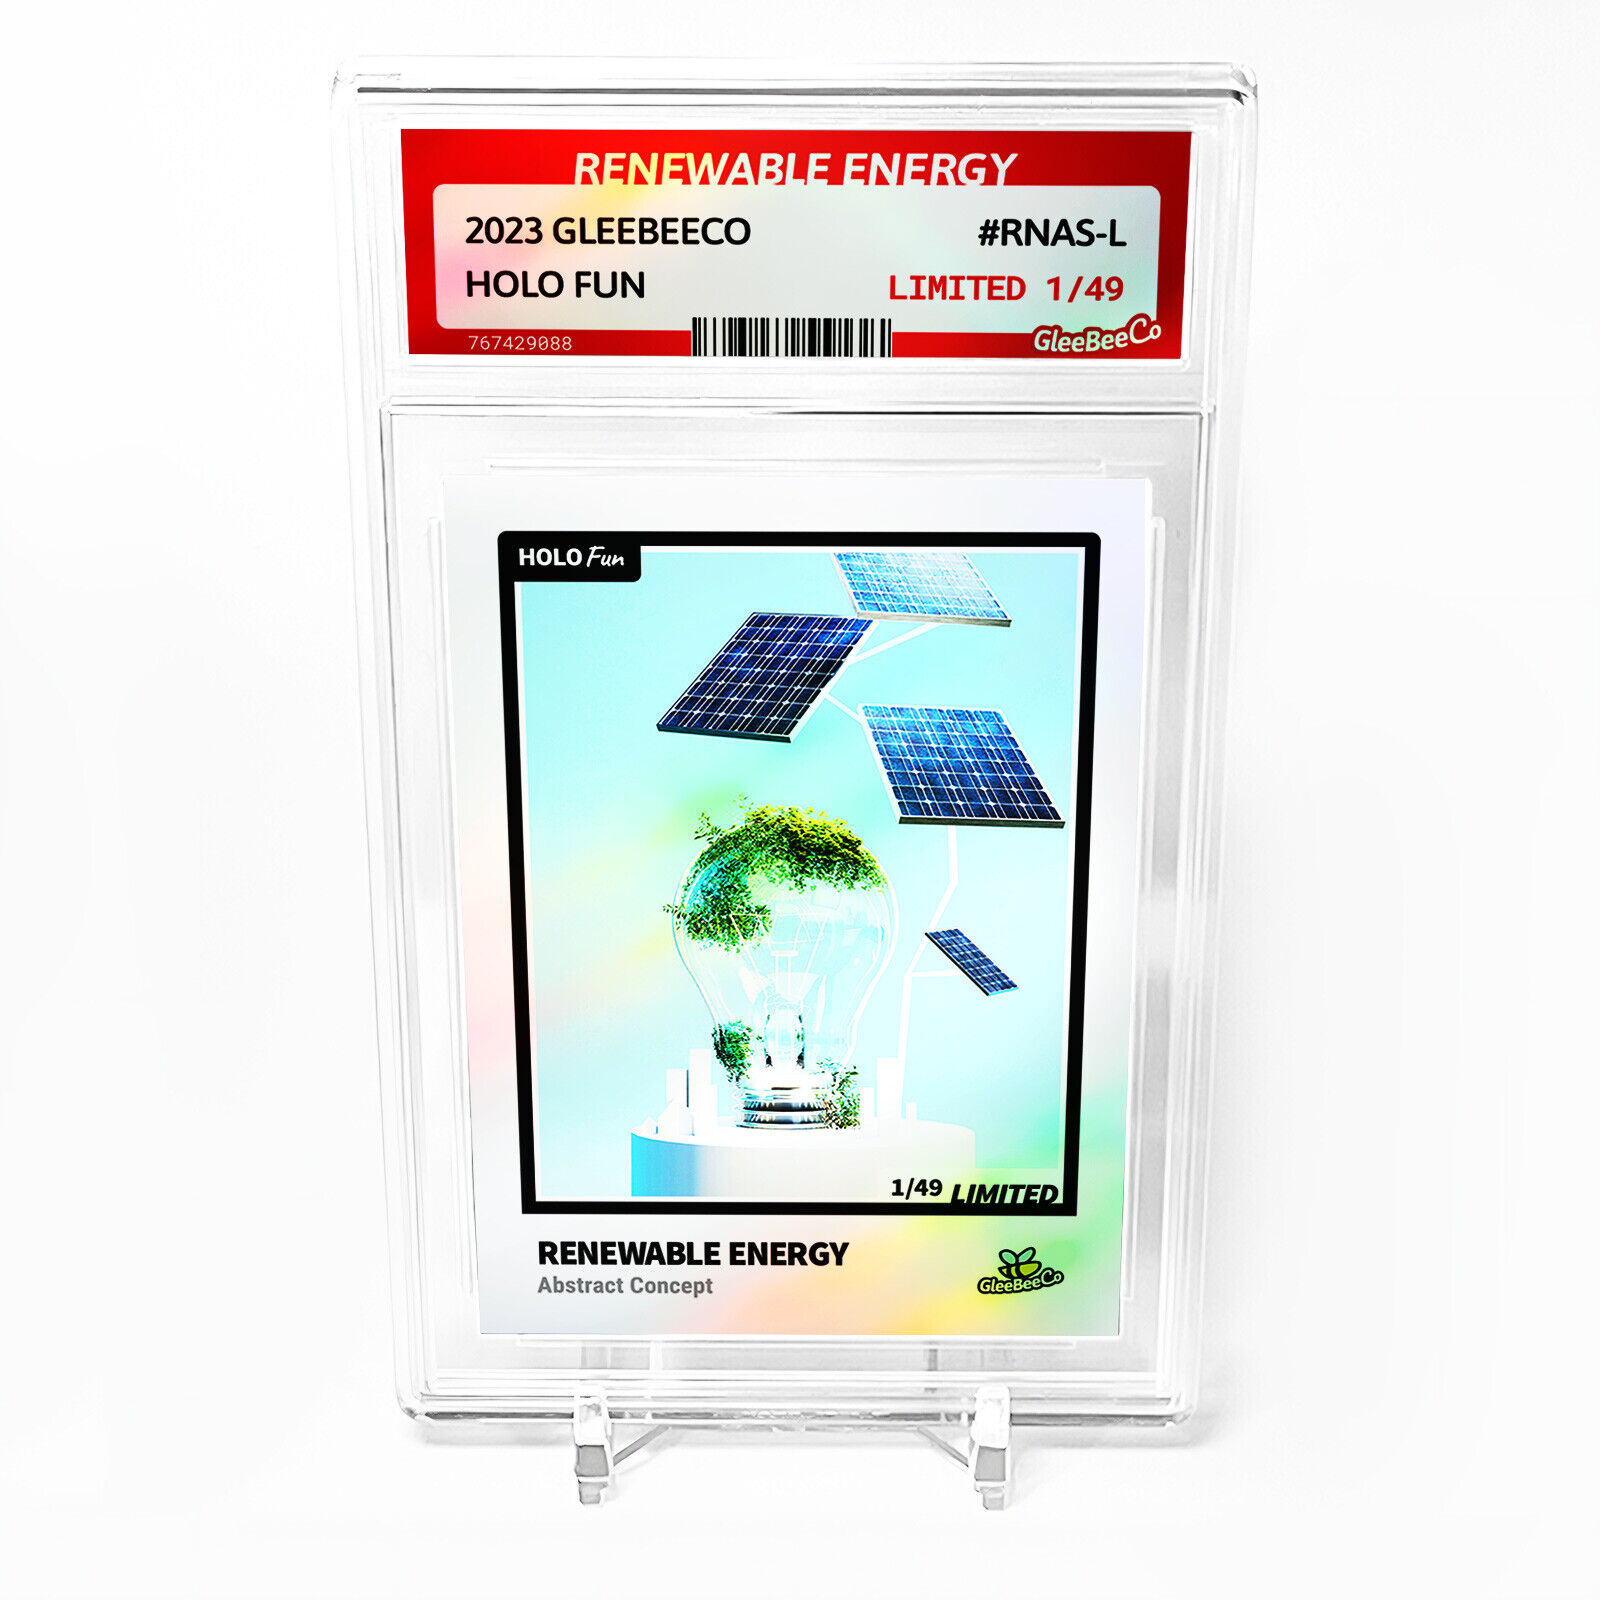 RENEWABLE ENERGY 2023 GleeBeeCo Card Abstract Concept Holographic #RNAS-L /49